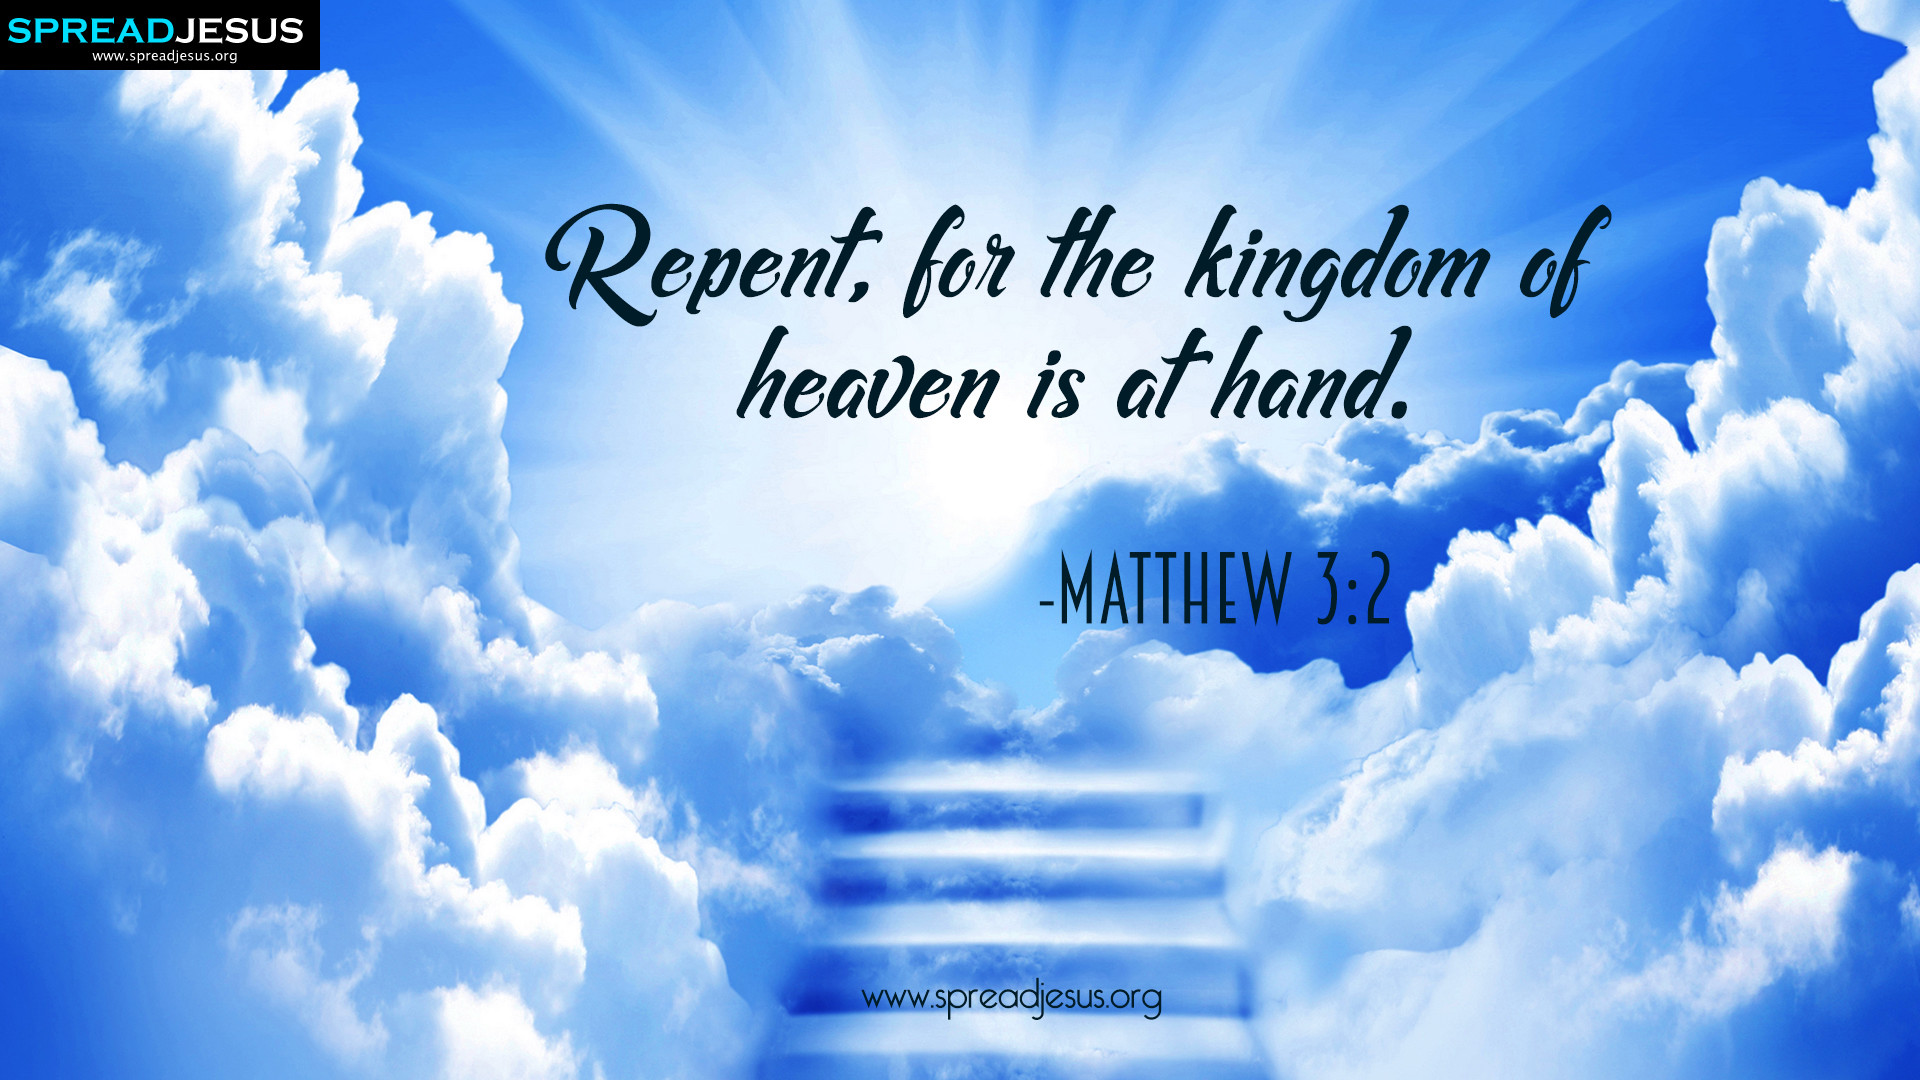 Bible Quotes HD Wallpaper Matthew 32 Download Repent,for the kingdom of